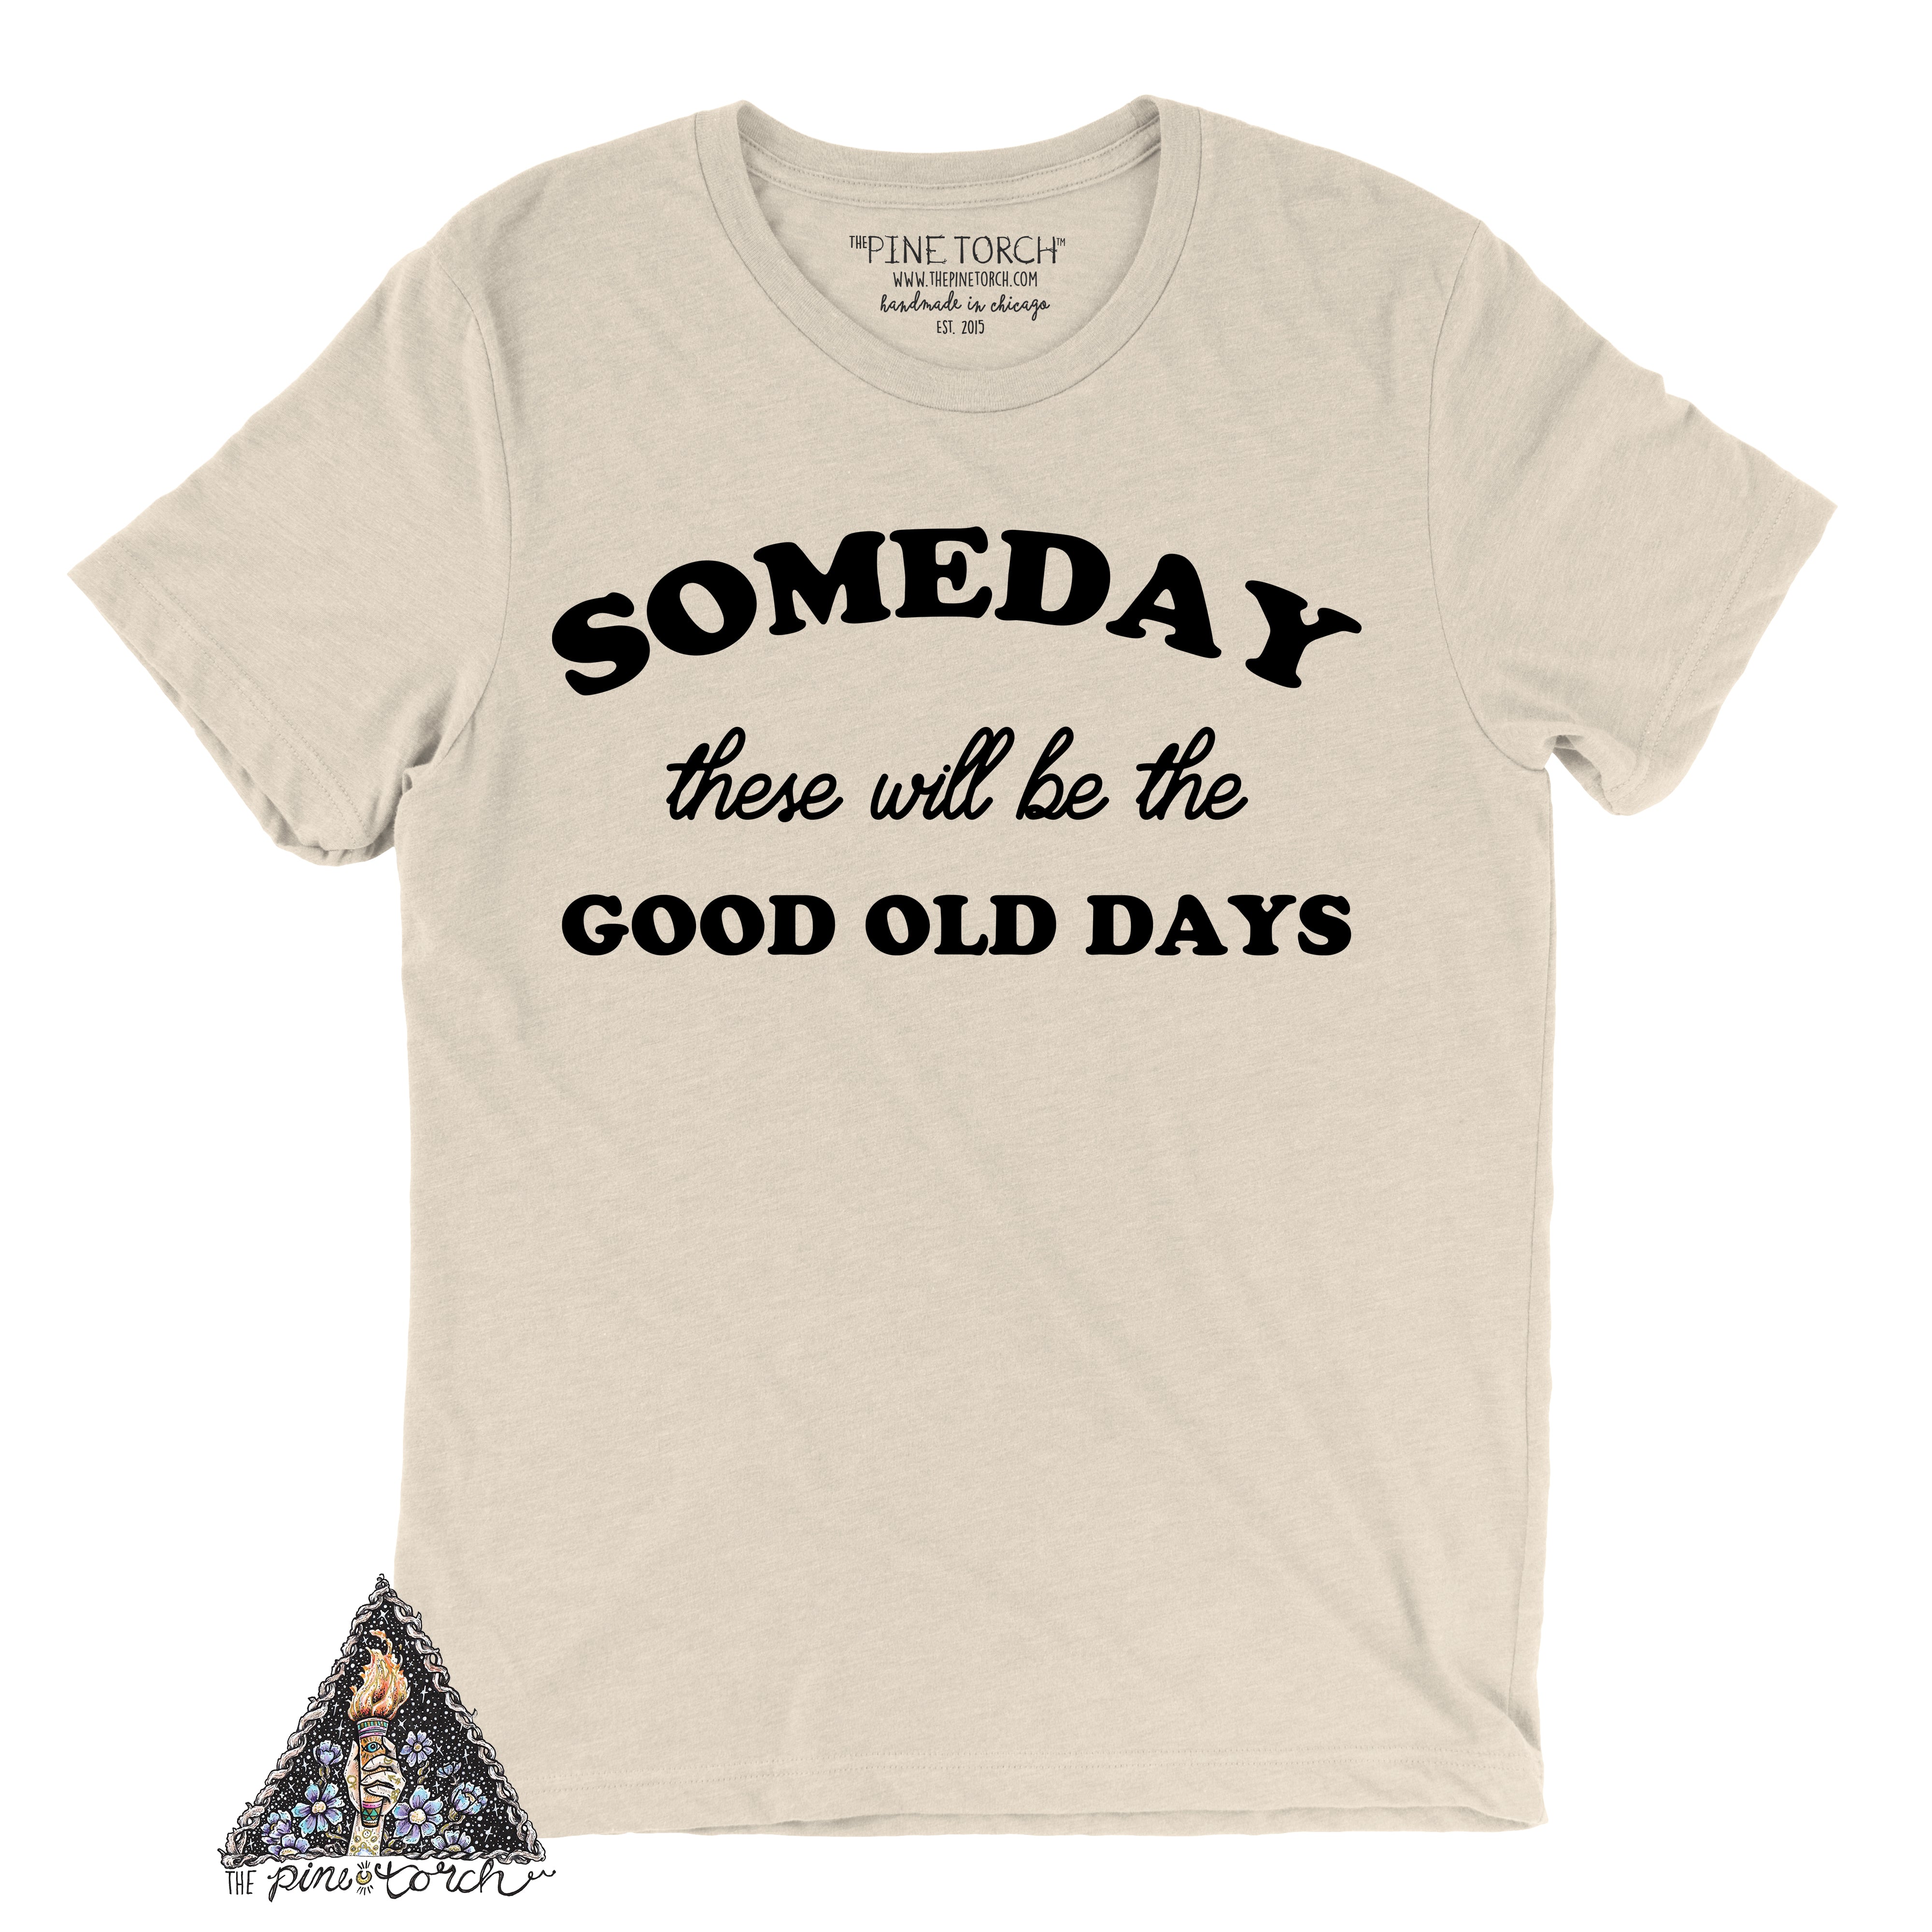 « SOMEDAY THESE WILL BE THE GOOD OLD DAYS » CREAM BODYSUIT